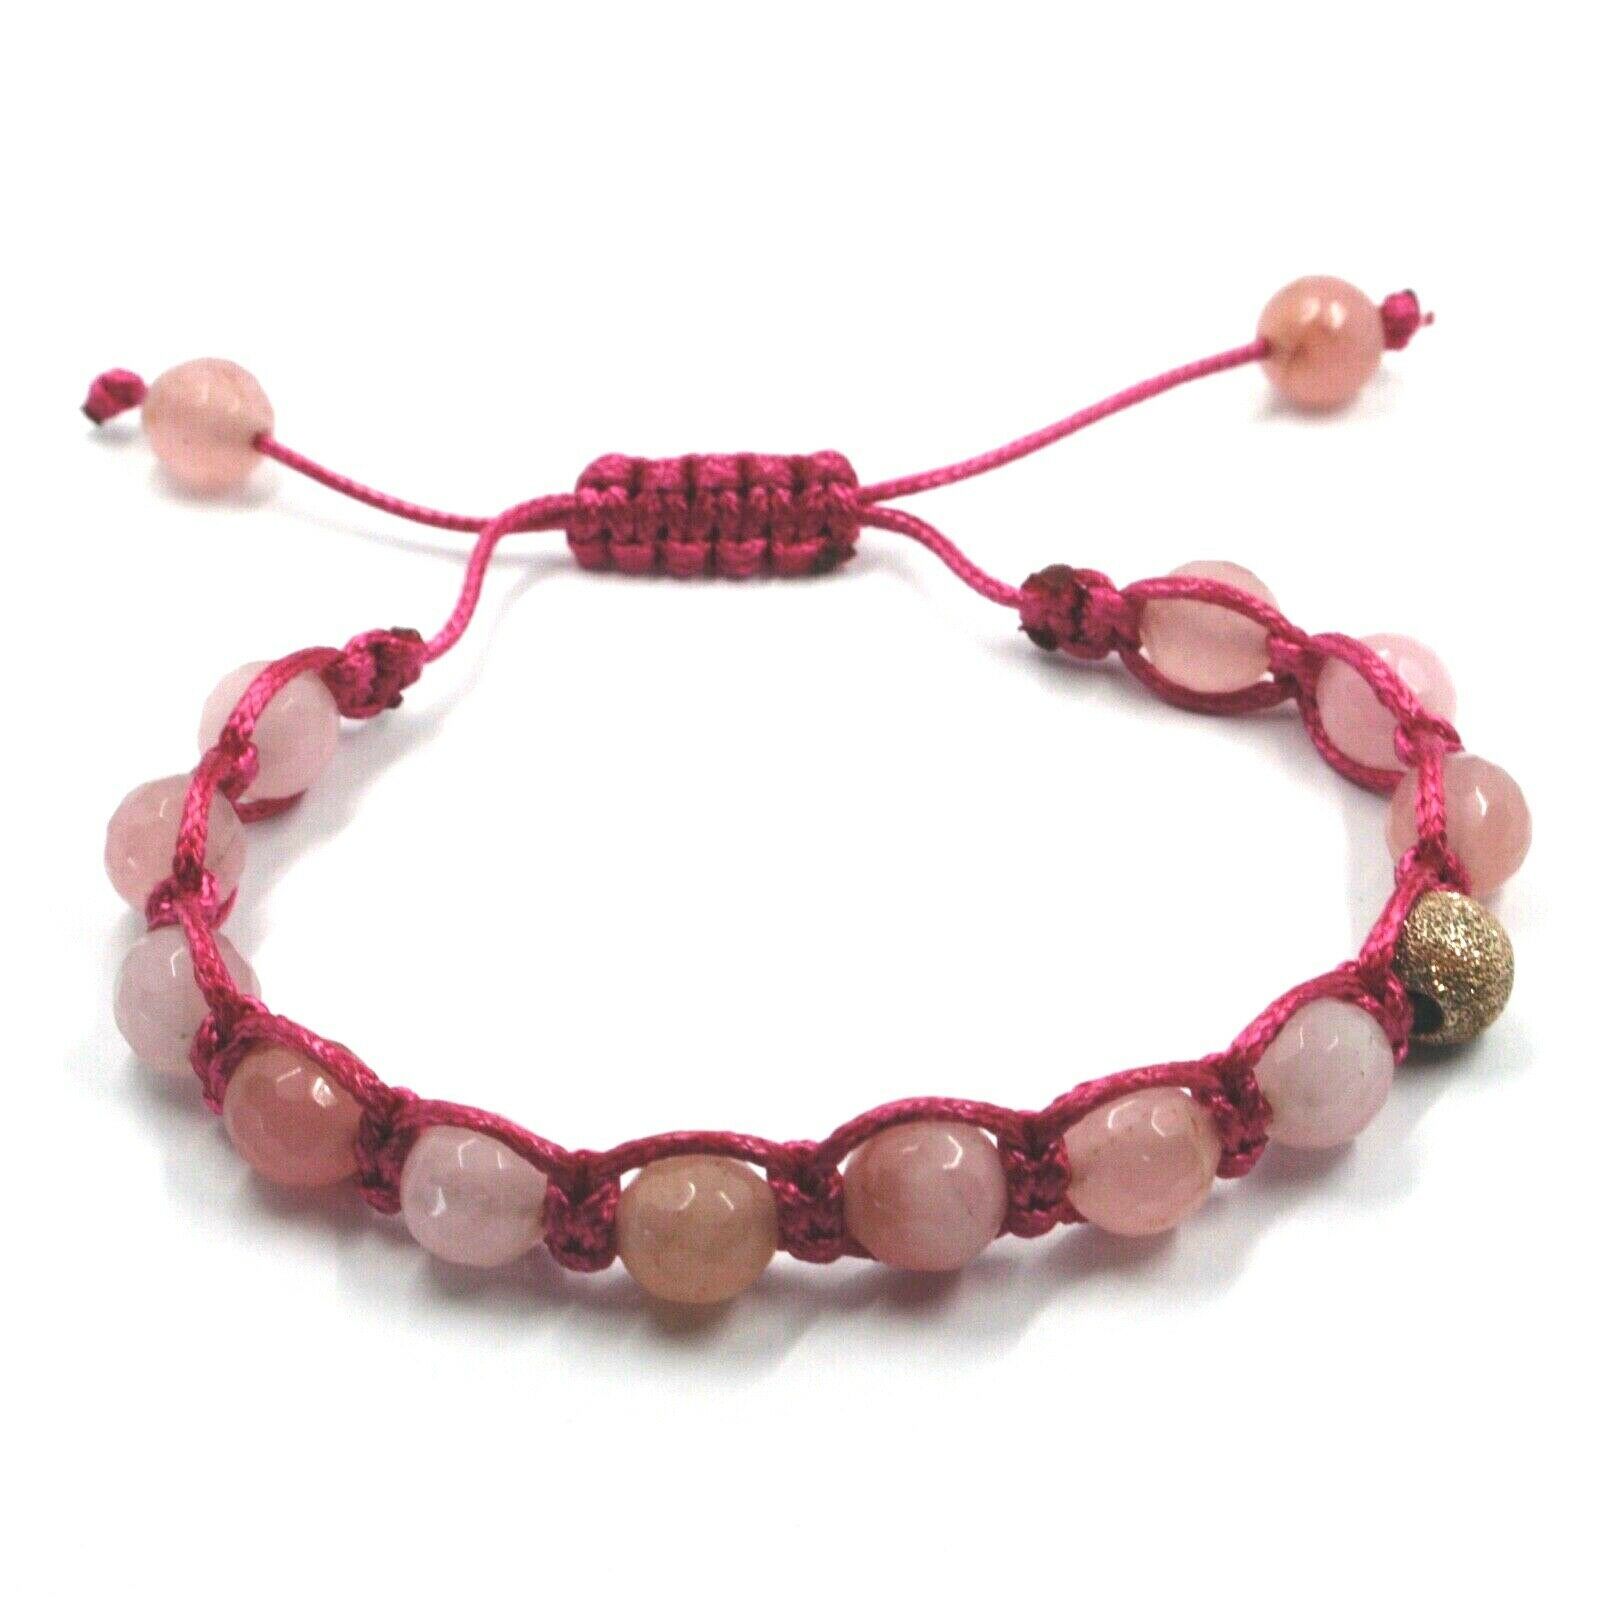 Primary image for SHAMBALLA BRACELET, PINK CORD, ROSE JADE, WORKED 925 STERLING SILVER SPHERES